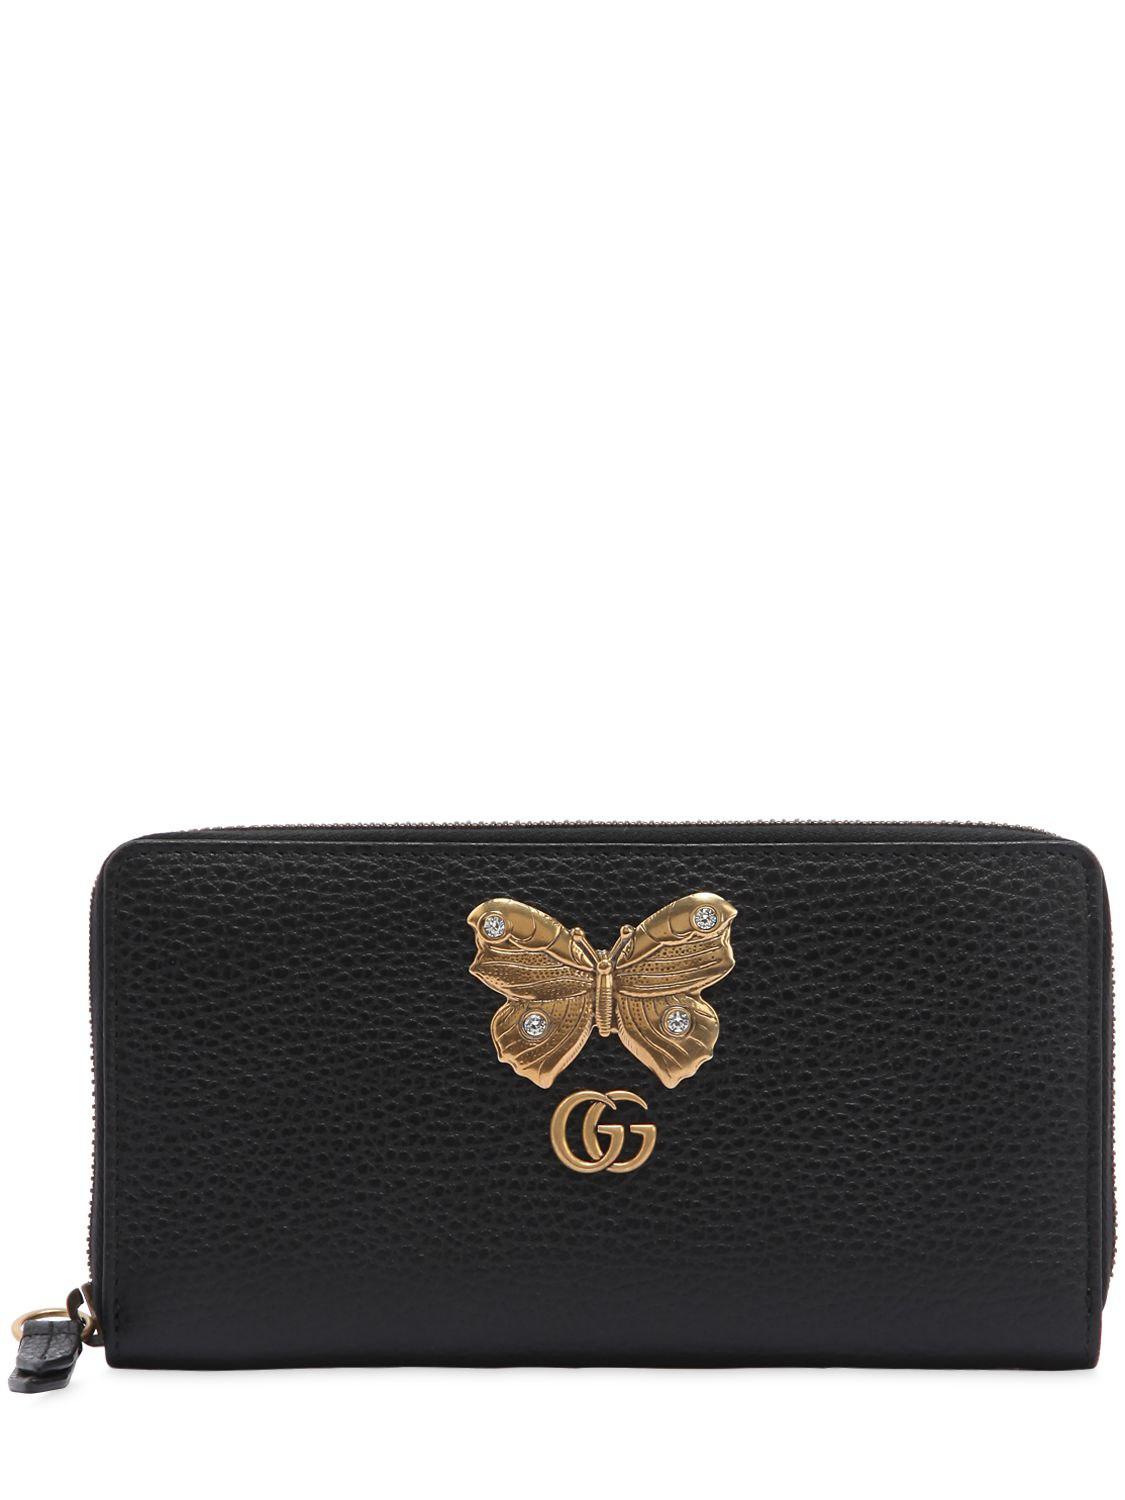 Gucci Butterfly Zip Around Leather Wallet in Black - Lyst